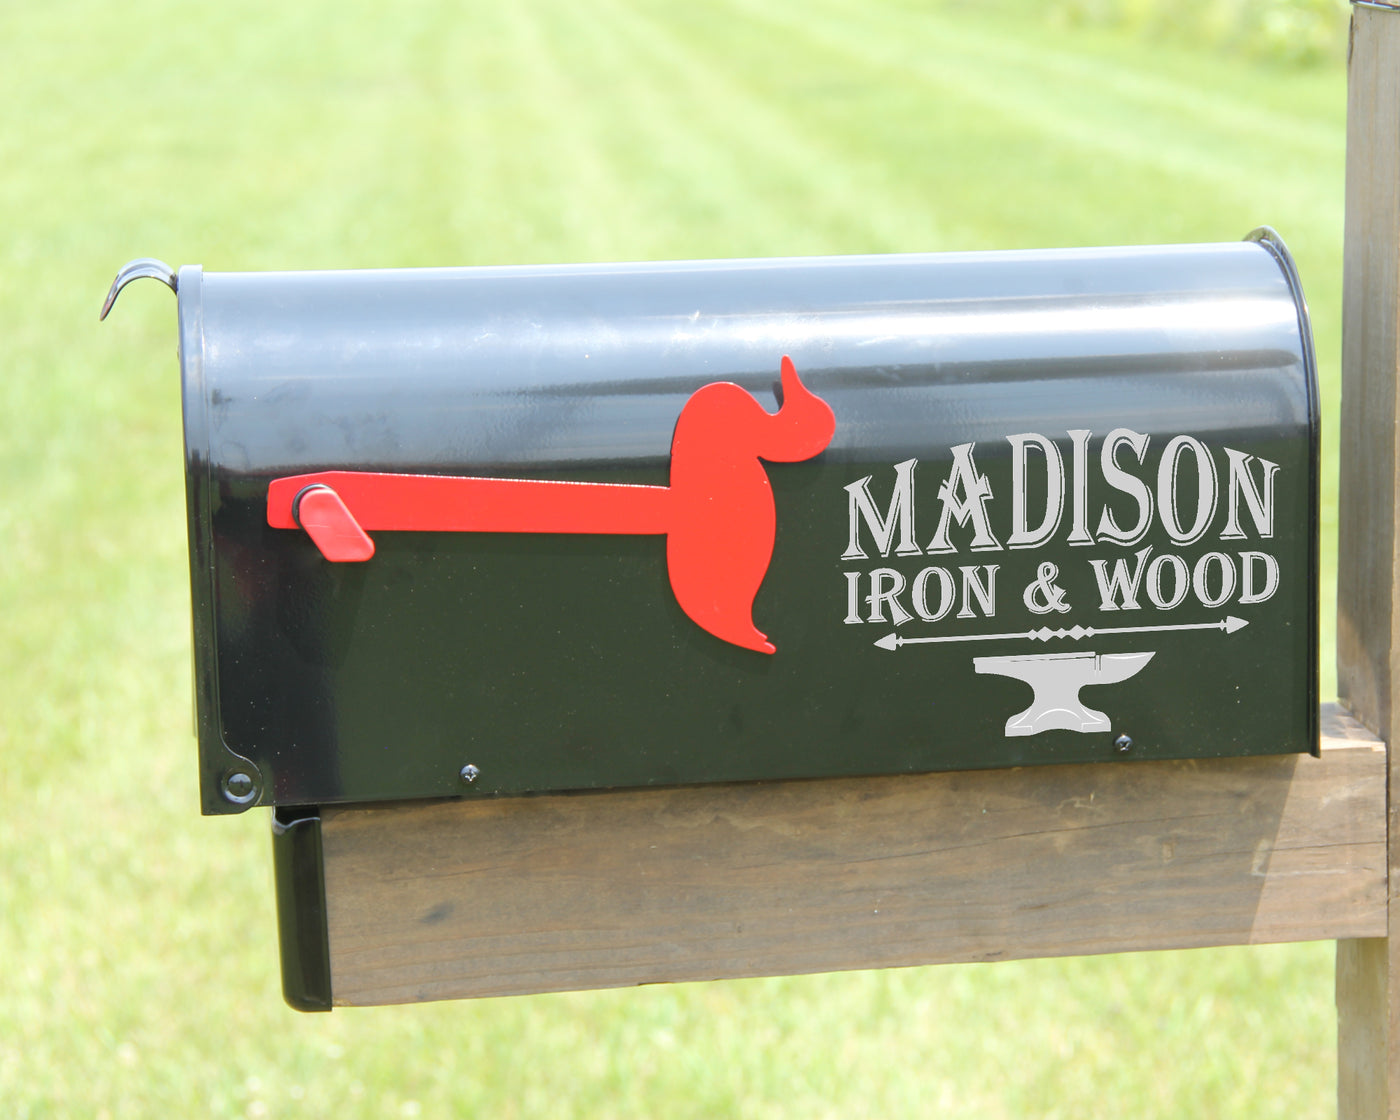 Duck Mailbox Flag - Madison Iron and Wood - Mailbox Post Decor - metal outdoor decor - Steel deocrations - american made products - veteran owned business products - fencing decorations - fencing supplies - custom wall decorations - personalized wall signs - steel - decorative post caps - steel post caps - metal post caps - brackets - structural brackets - home improvement - easter - easter decorations - easter gift - easter yard decor